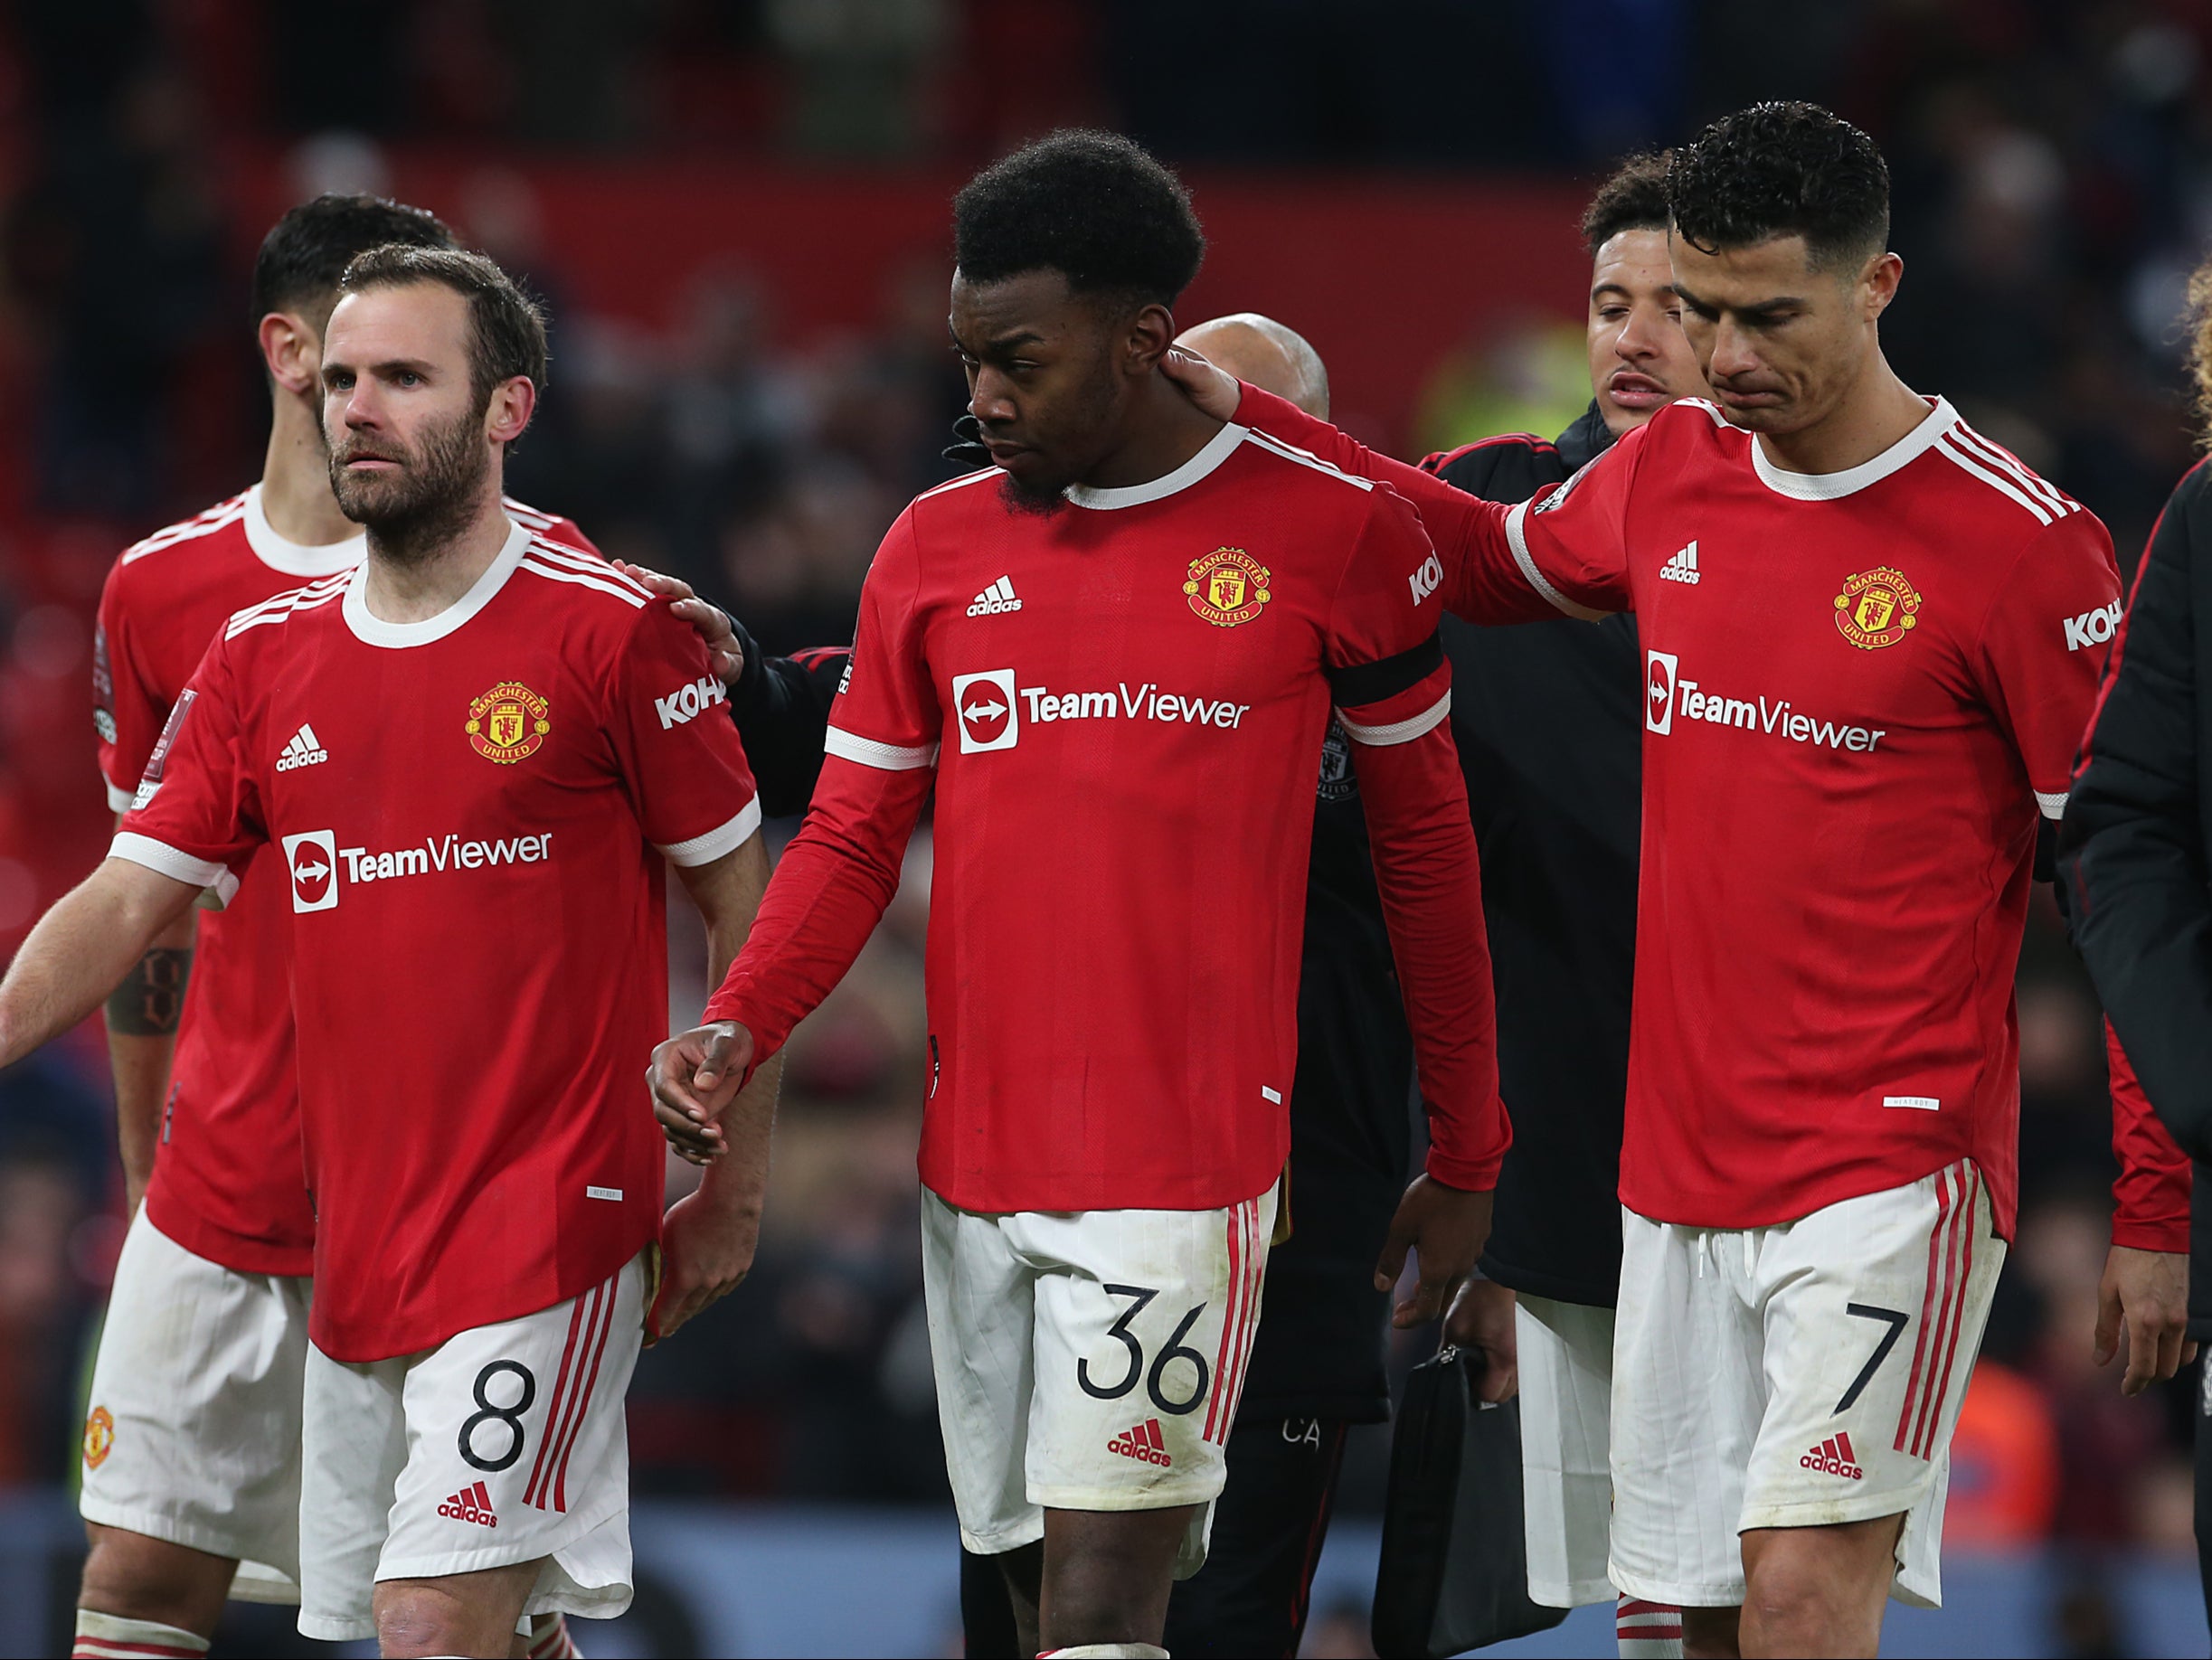 Manchester United teenager Anthony Elanga is consoled after missing his penalty